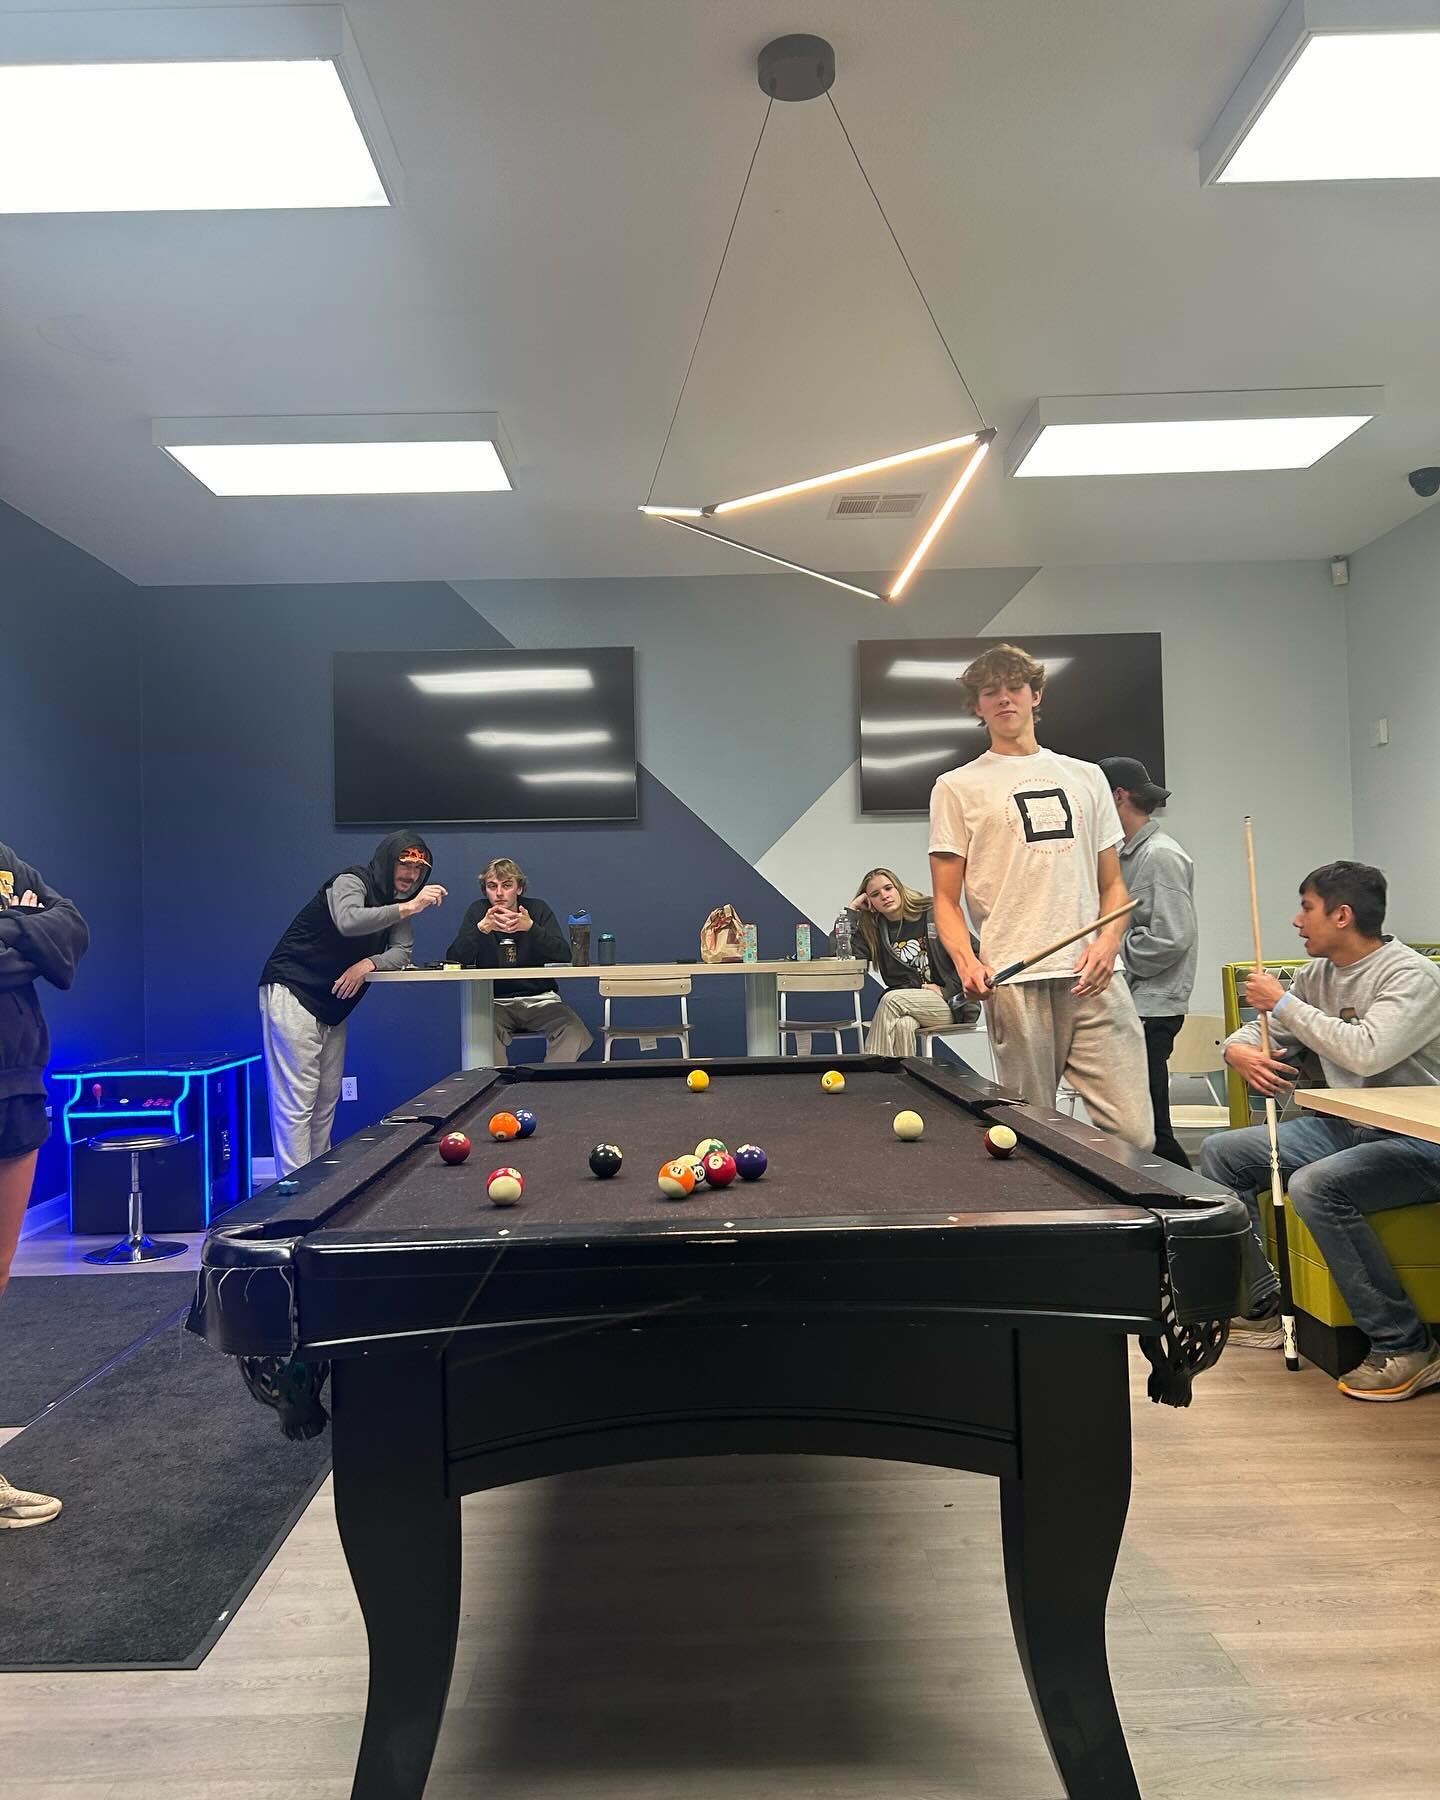 Here are some pictures 📸 from our pool tournament 🎱 on Friday! We had an awesome time! If you missed this one 🥲 don&rsquo;t worry! We have decided to make these a regular event! 🤯🤯 Stay tuned for our next play! Hope to see you there🫡🦾

#leasin